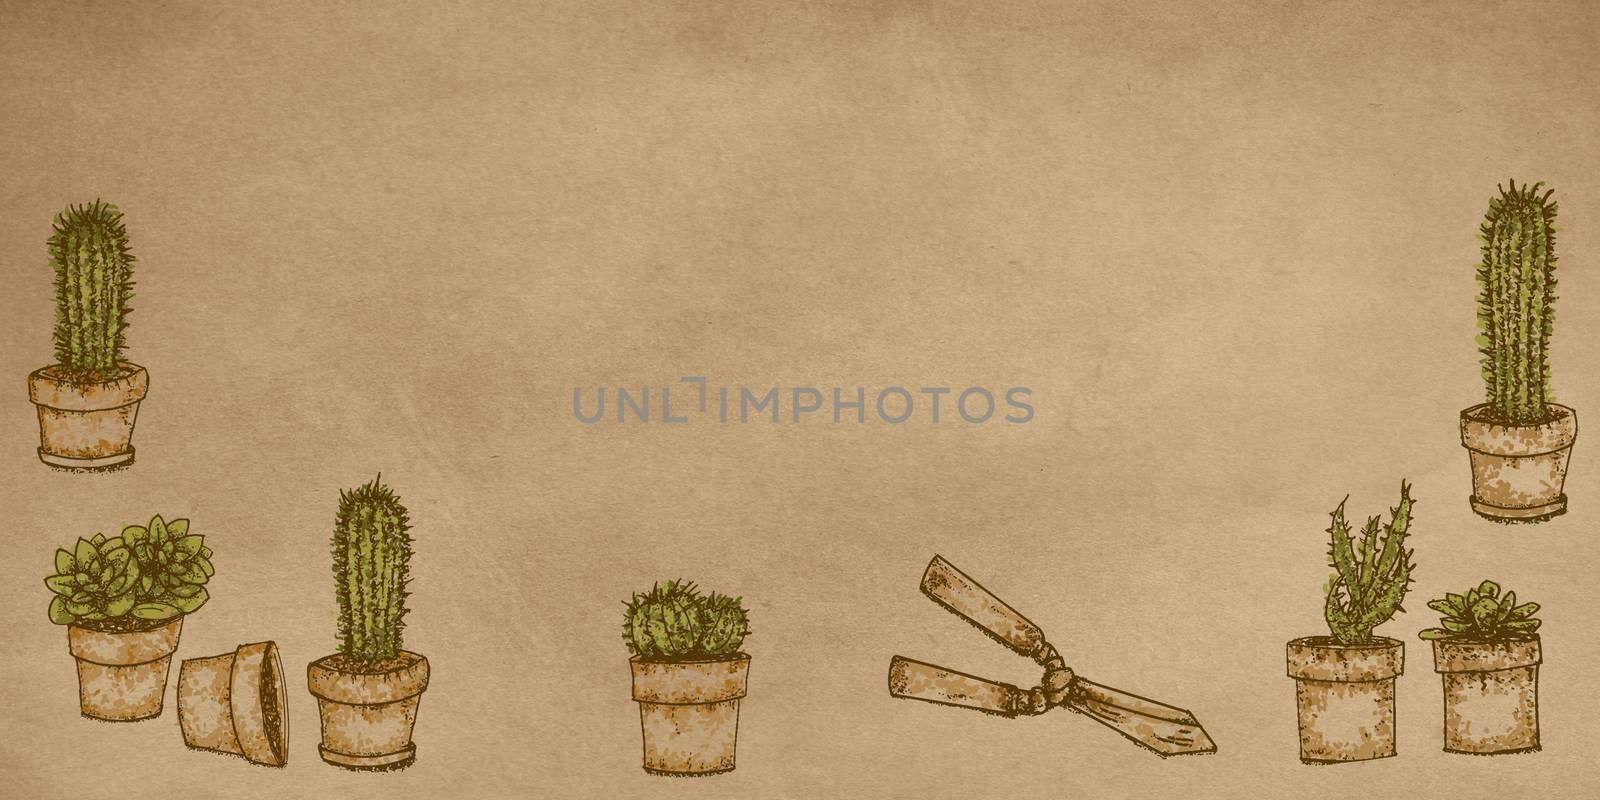 Realistic designs to the stretch of plants,a caktus
Garden flowers, plants, gardening tools